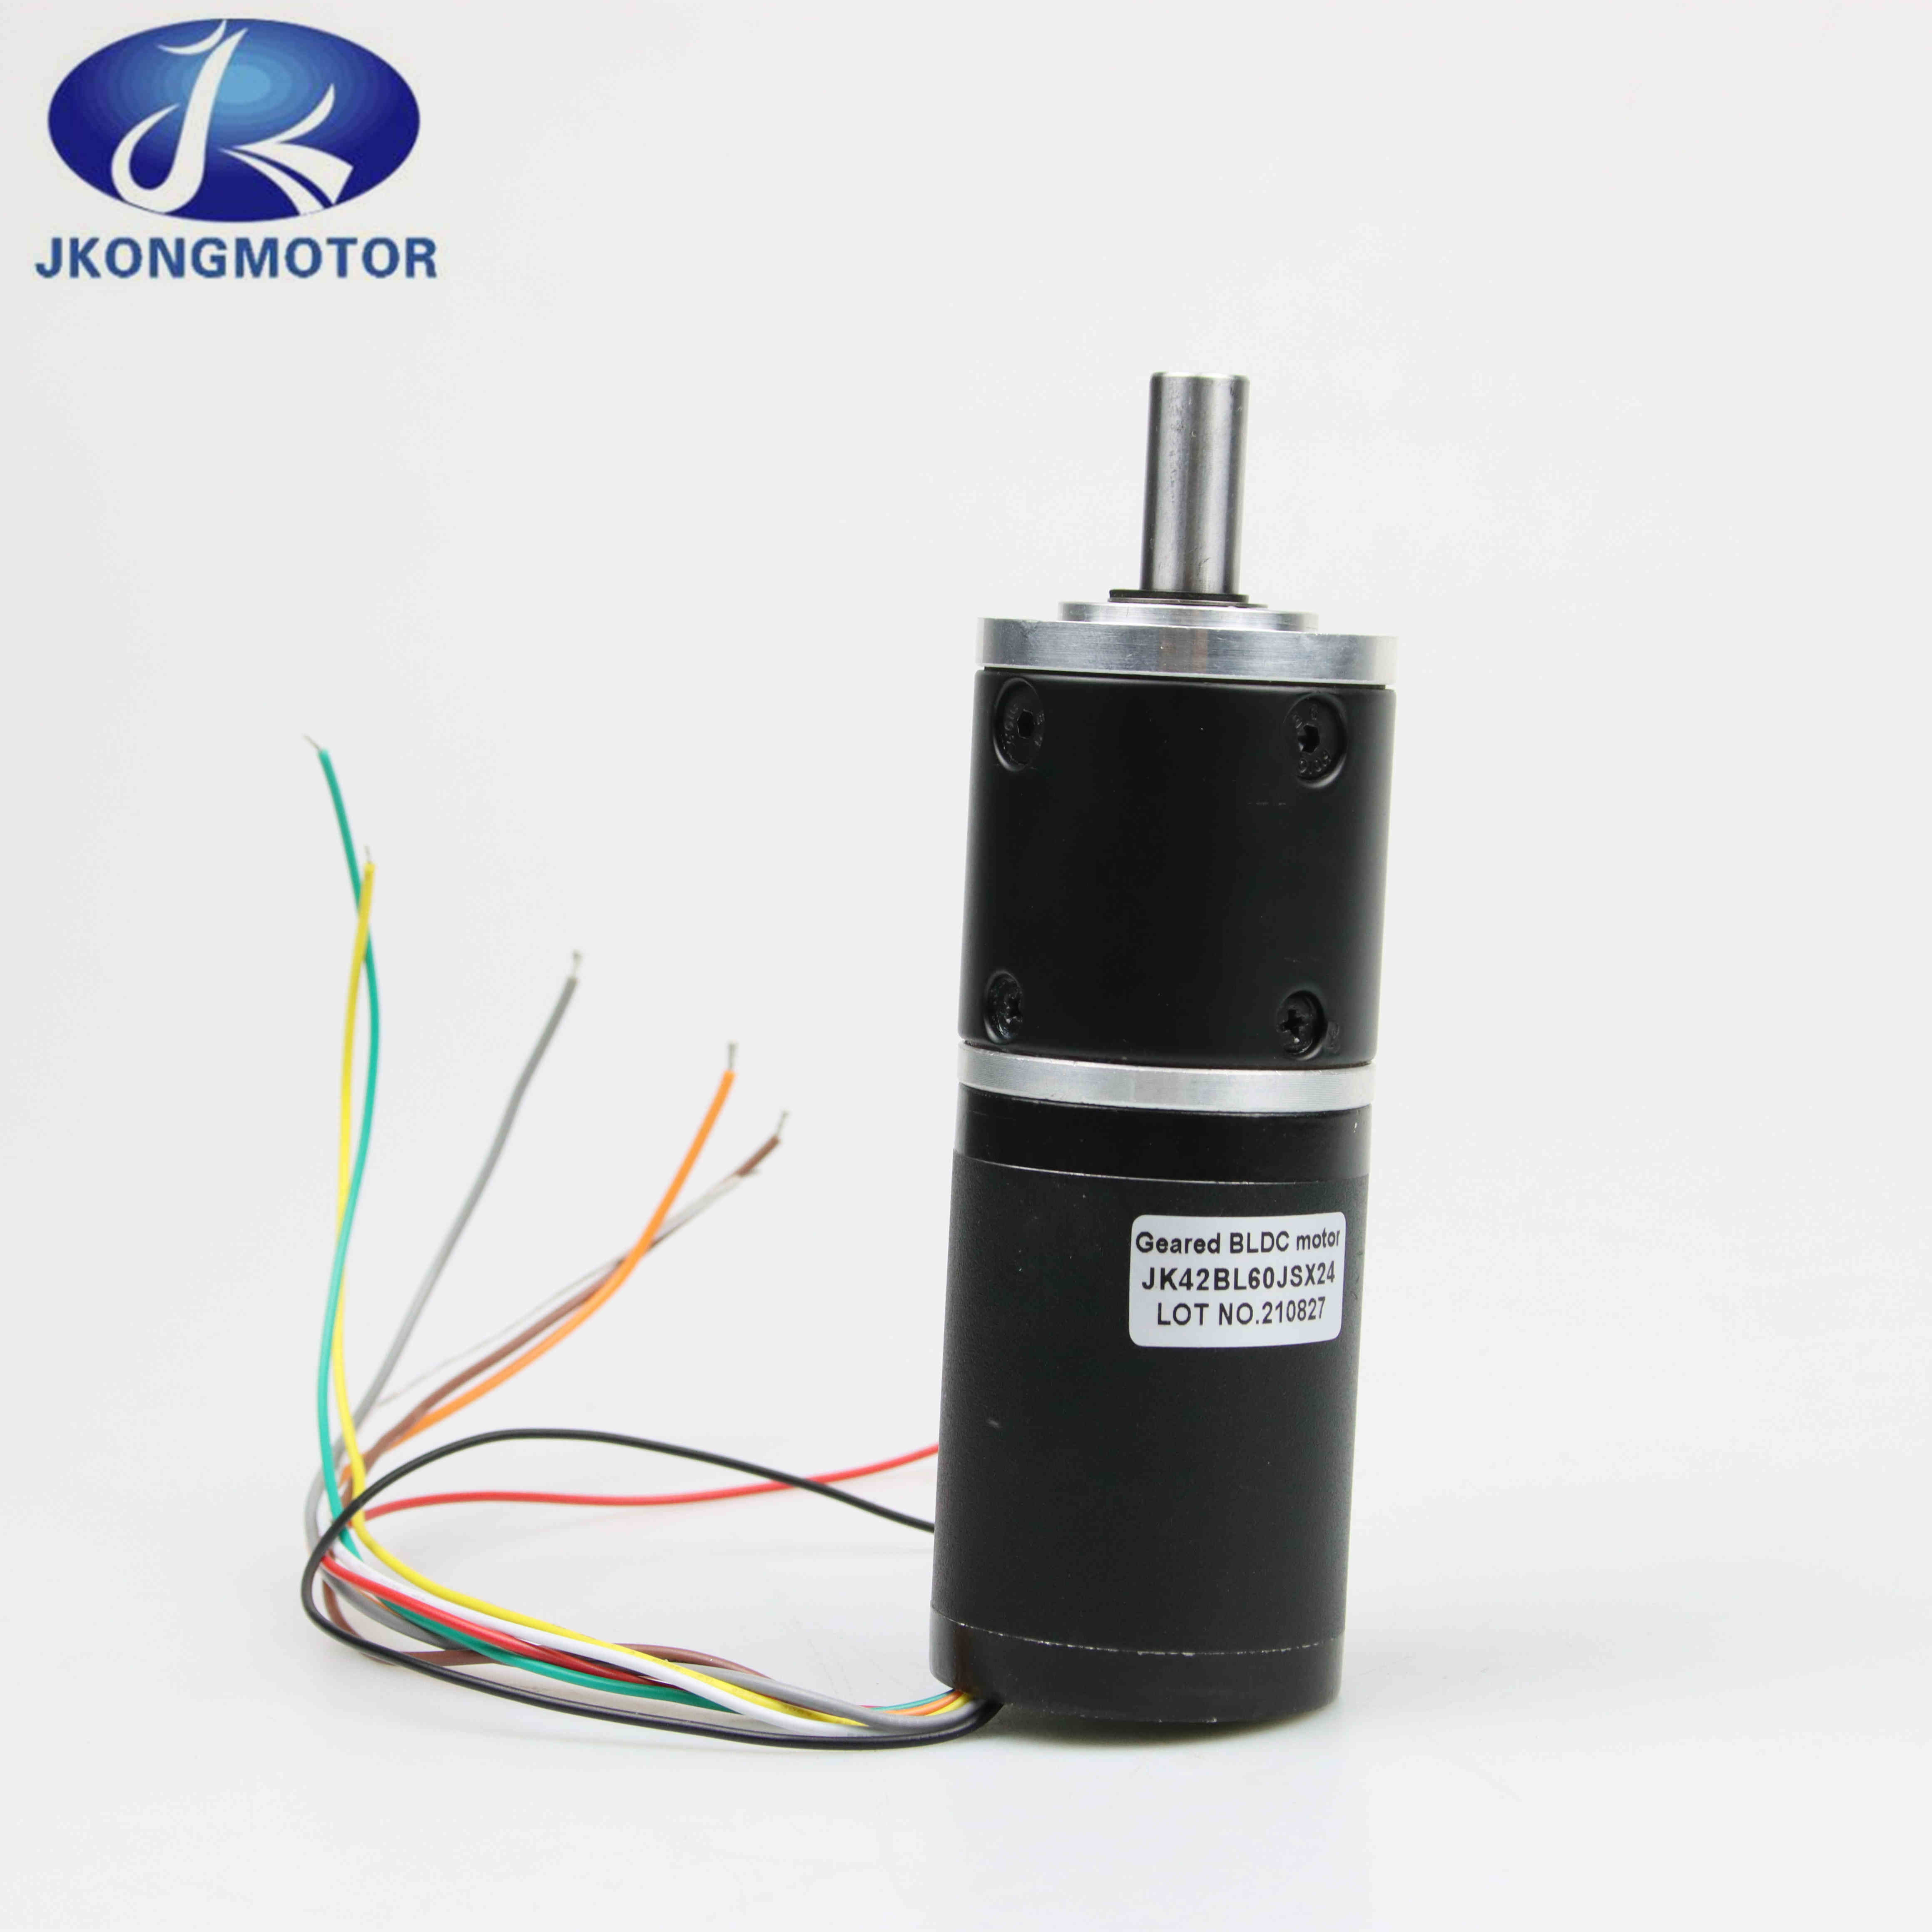 36V 32W 4000rpm Planetary Gearbox BLDC Motor industrial grade